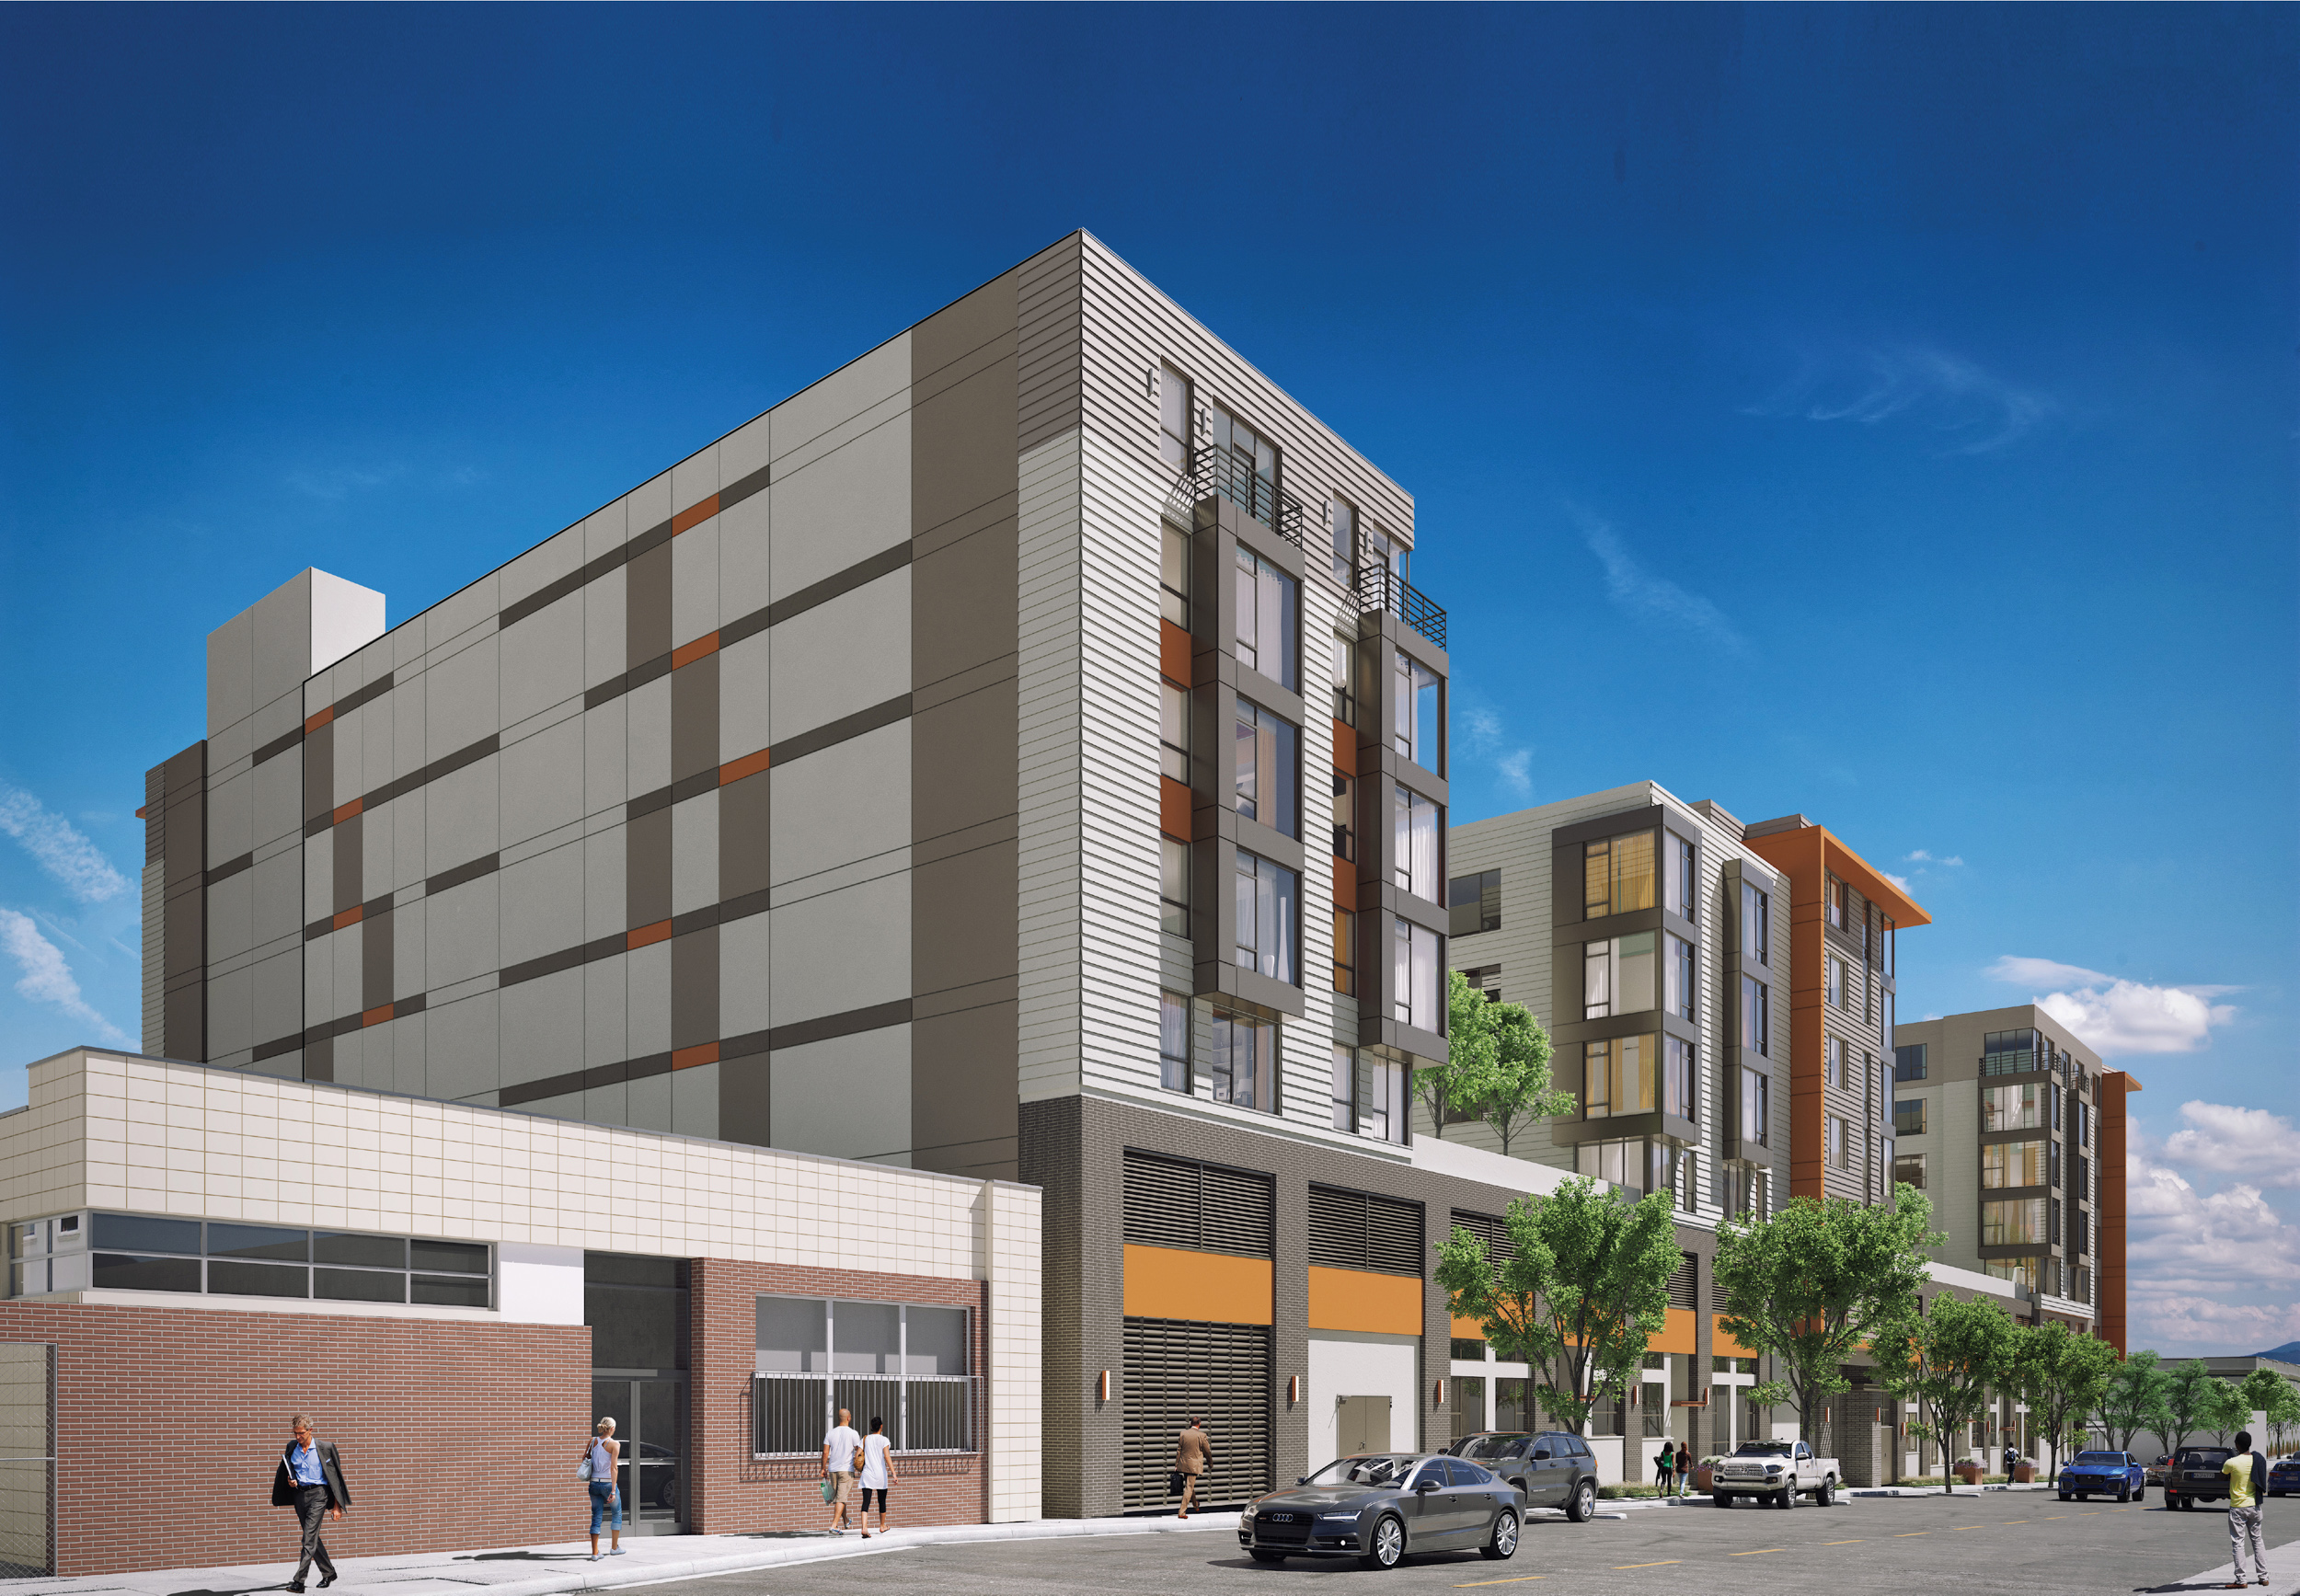 Celeste view along Miller Avenue, rendering by BDE Architecture